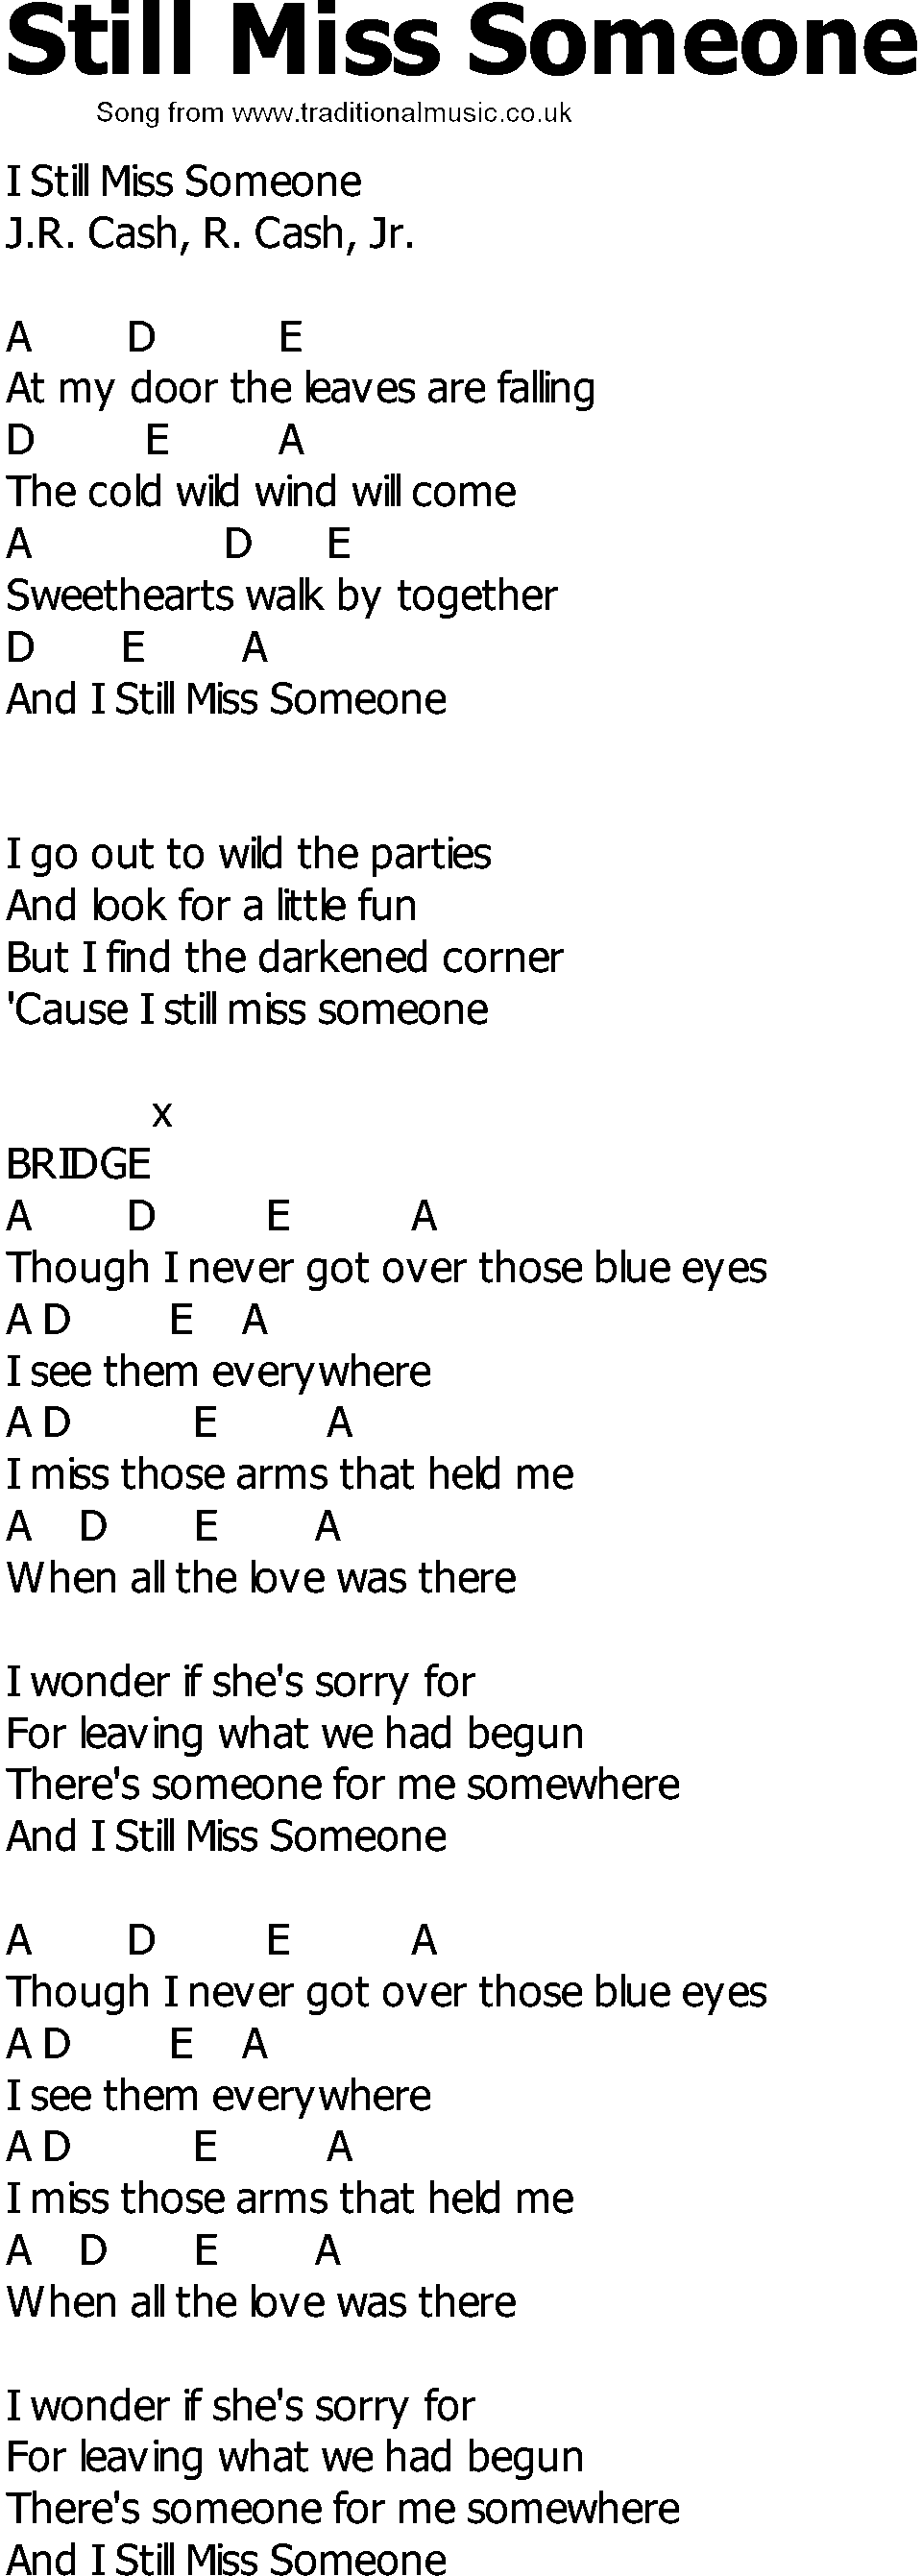 Old Country song lyrics with chords - Still Miss Someone